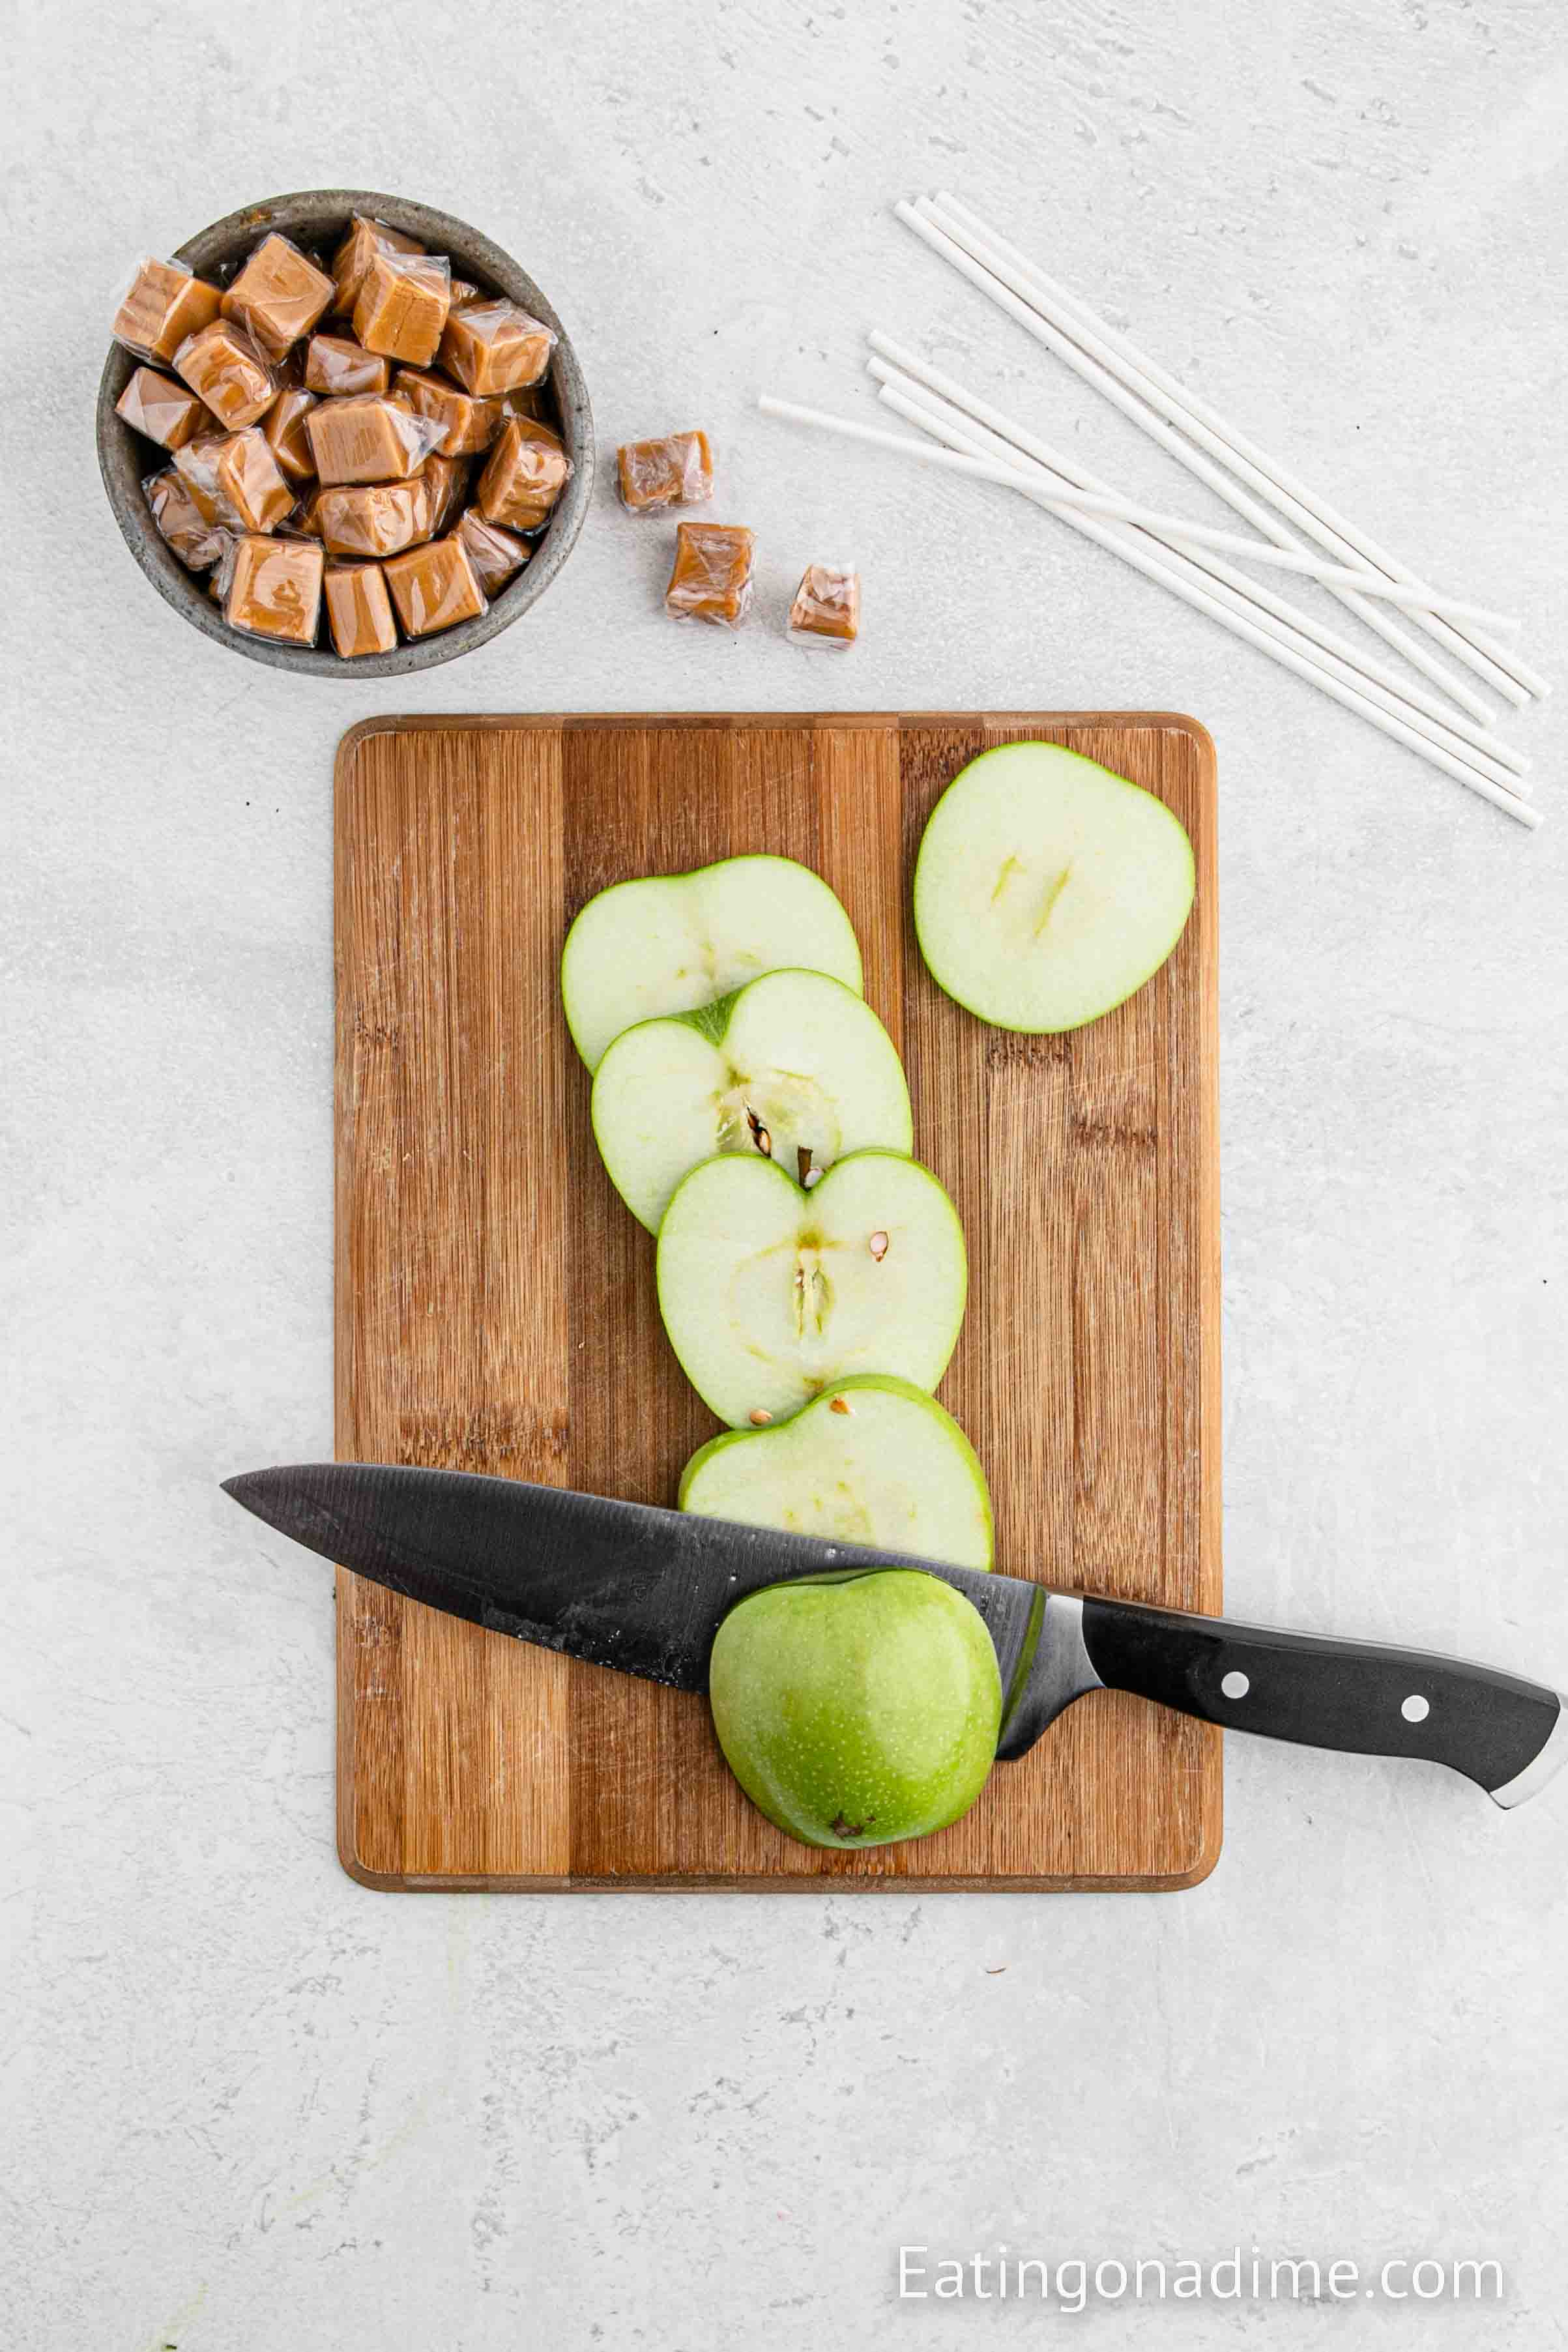 Slicing apples on a cutting board